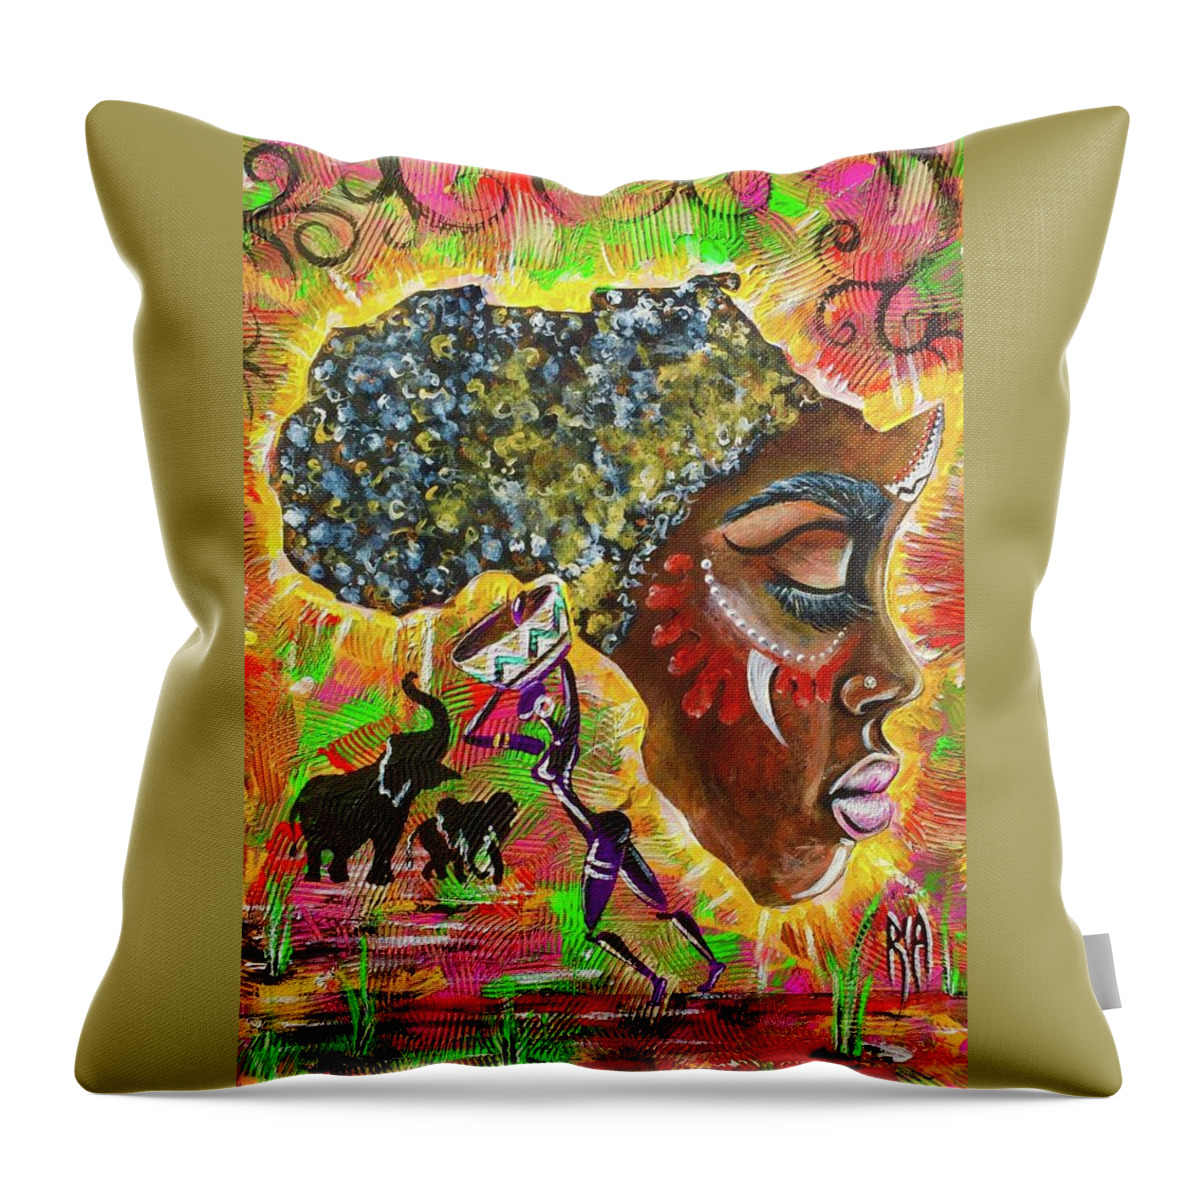 Africa Throw Pillow featuring the photograph Africa by Artist RiA